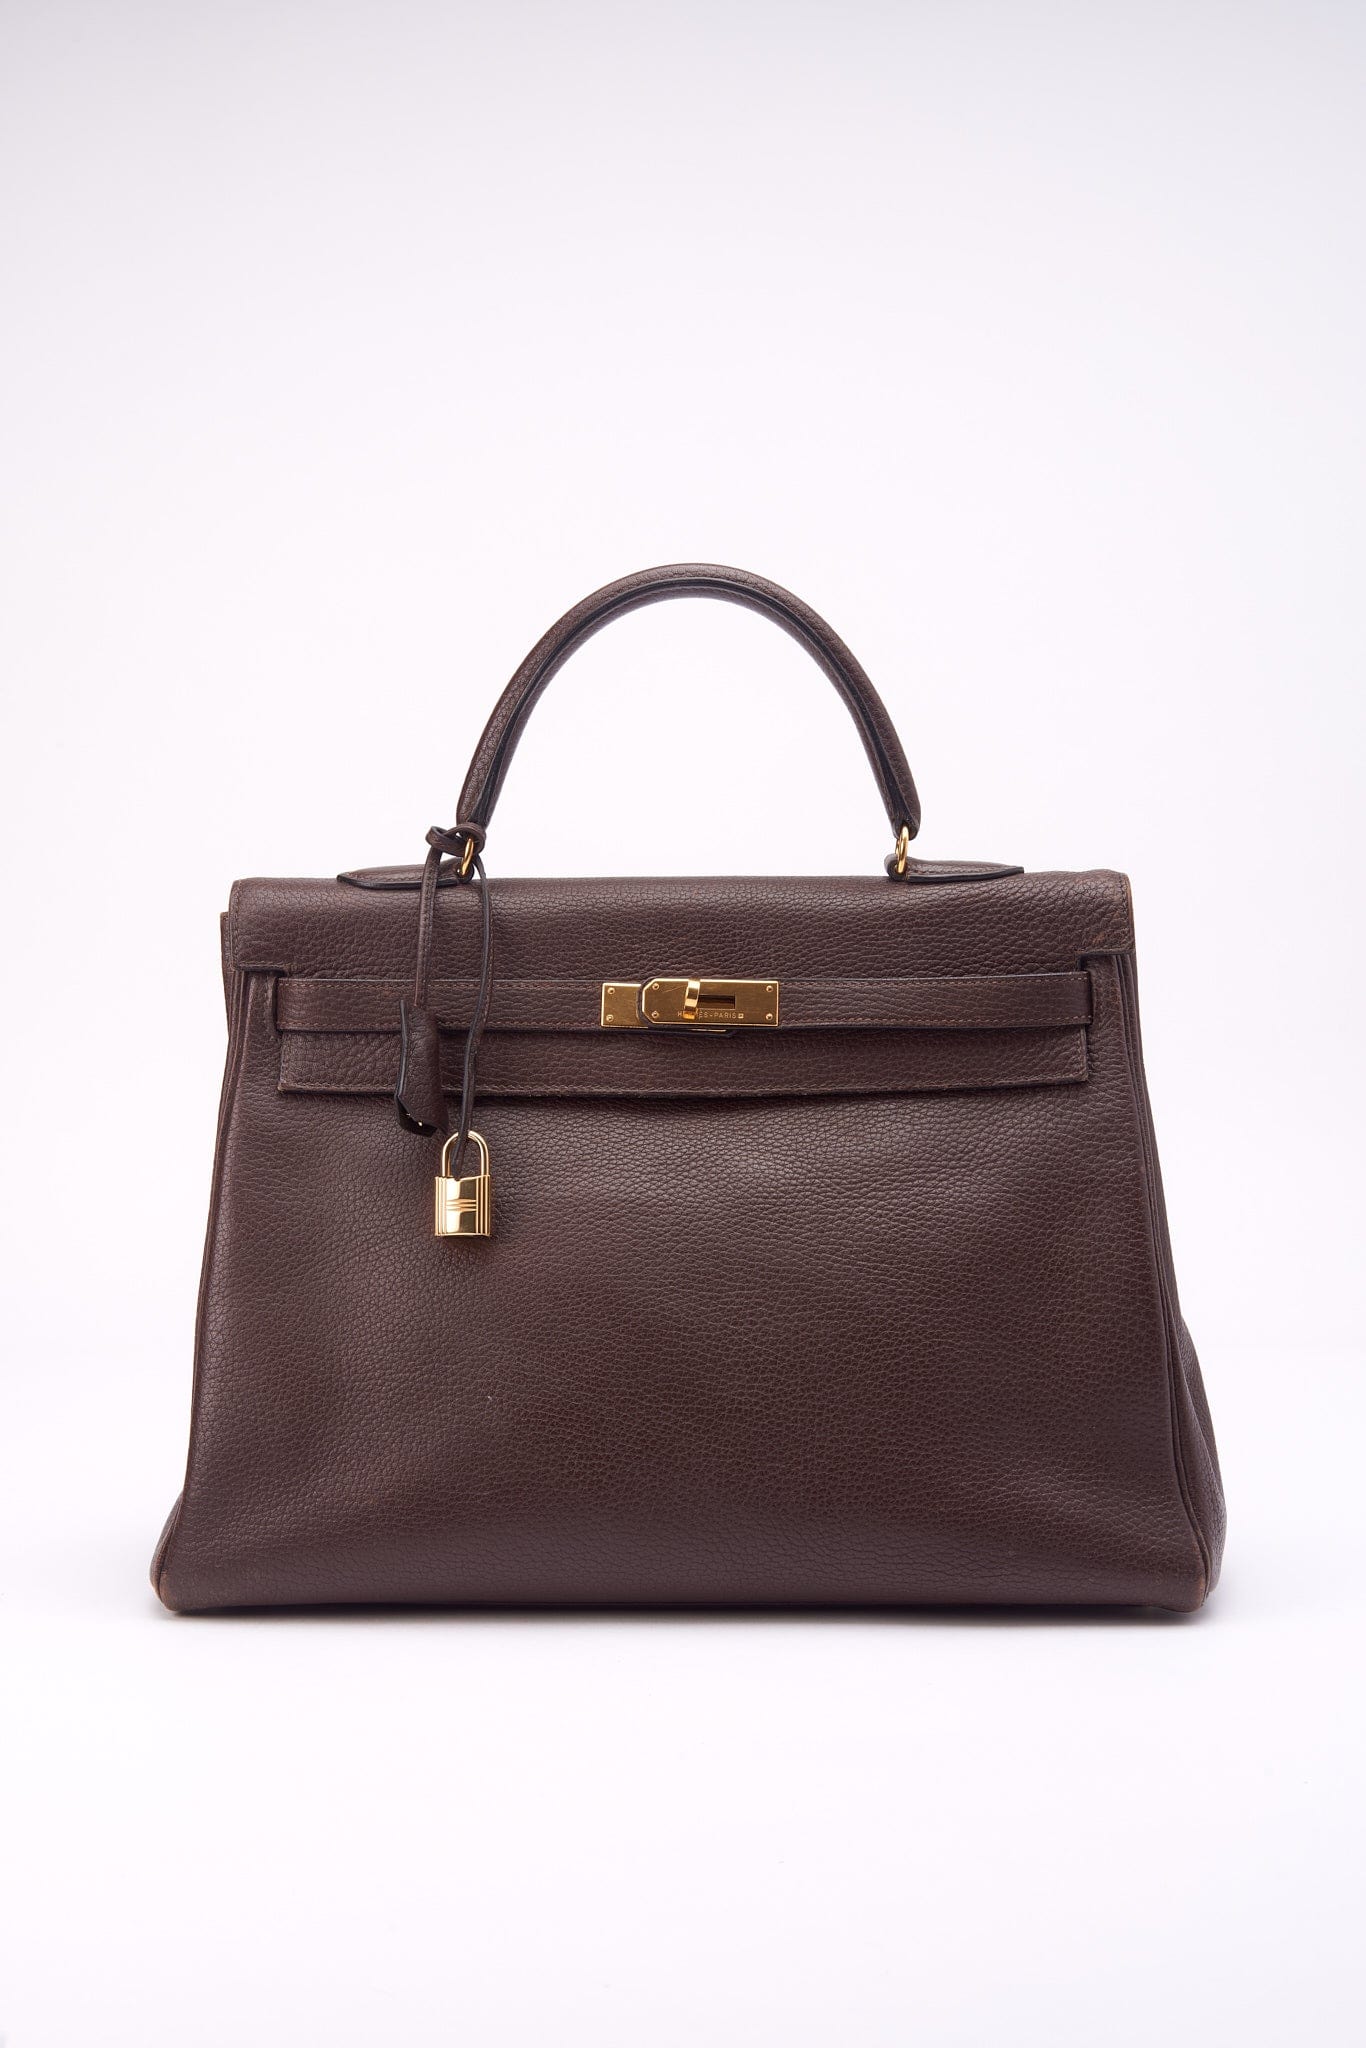 Hermès Kelly Retourne 35 in a Brown Taurillon Clemence Leather